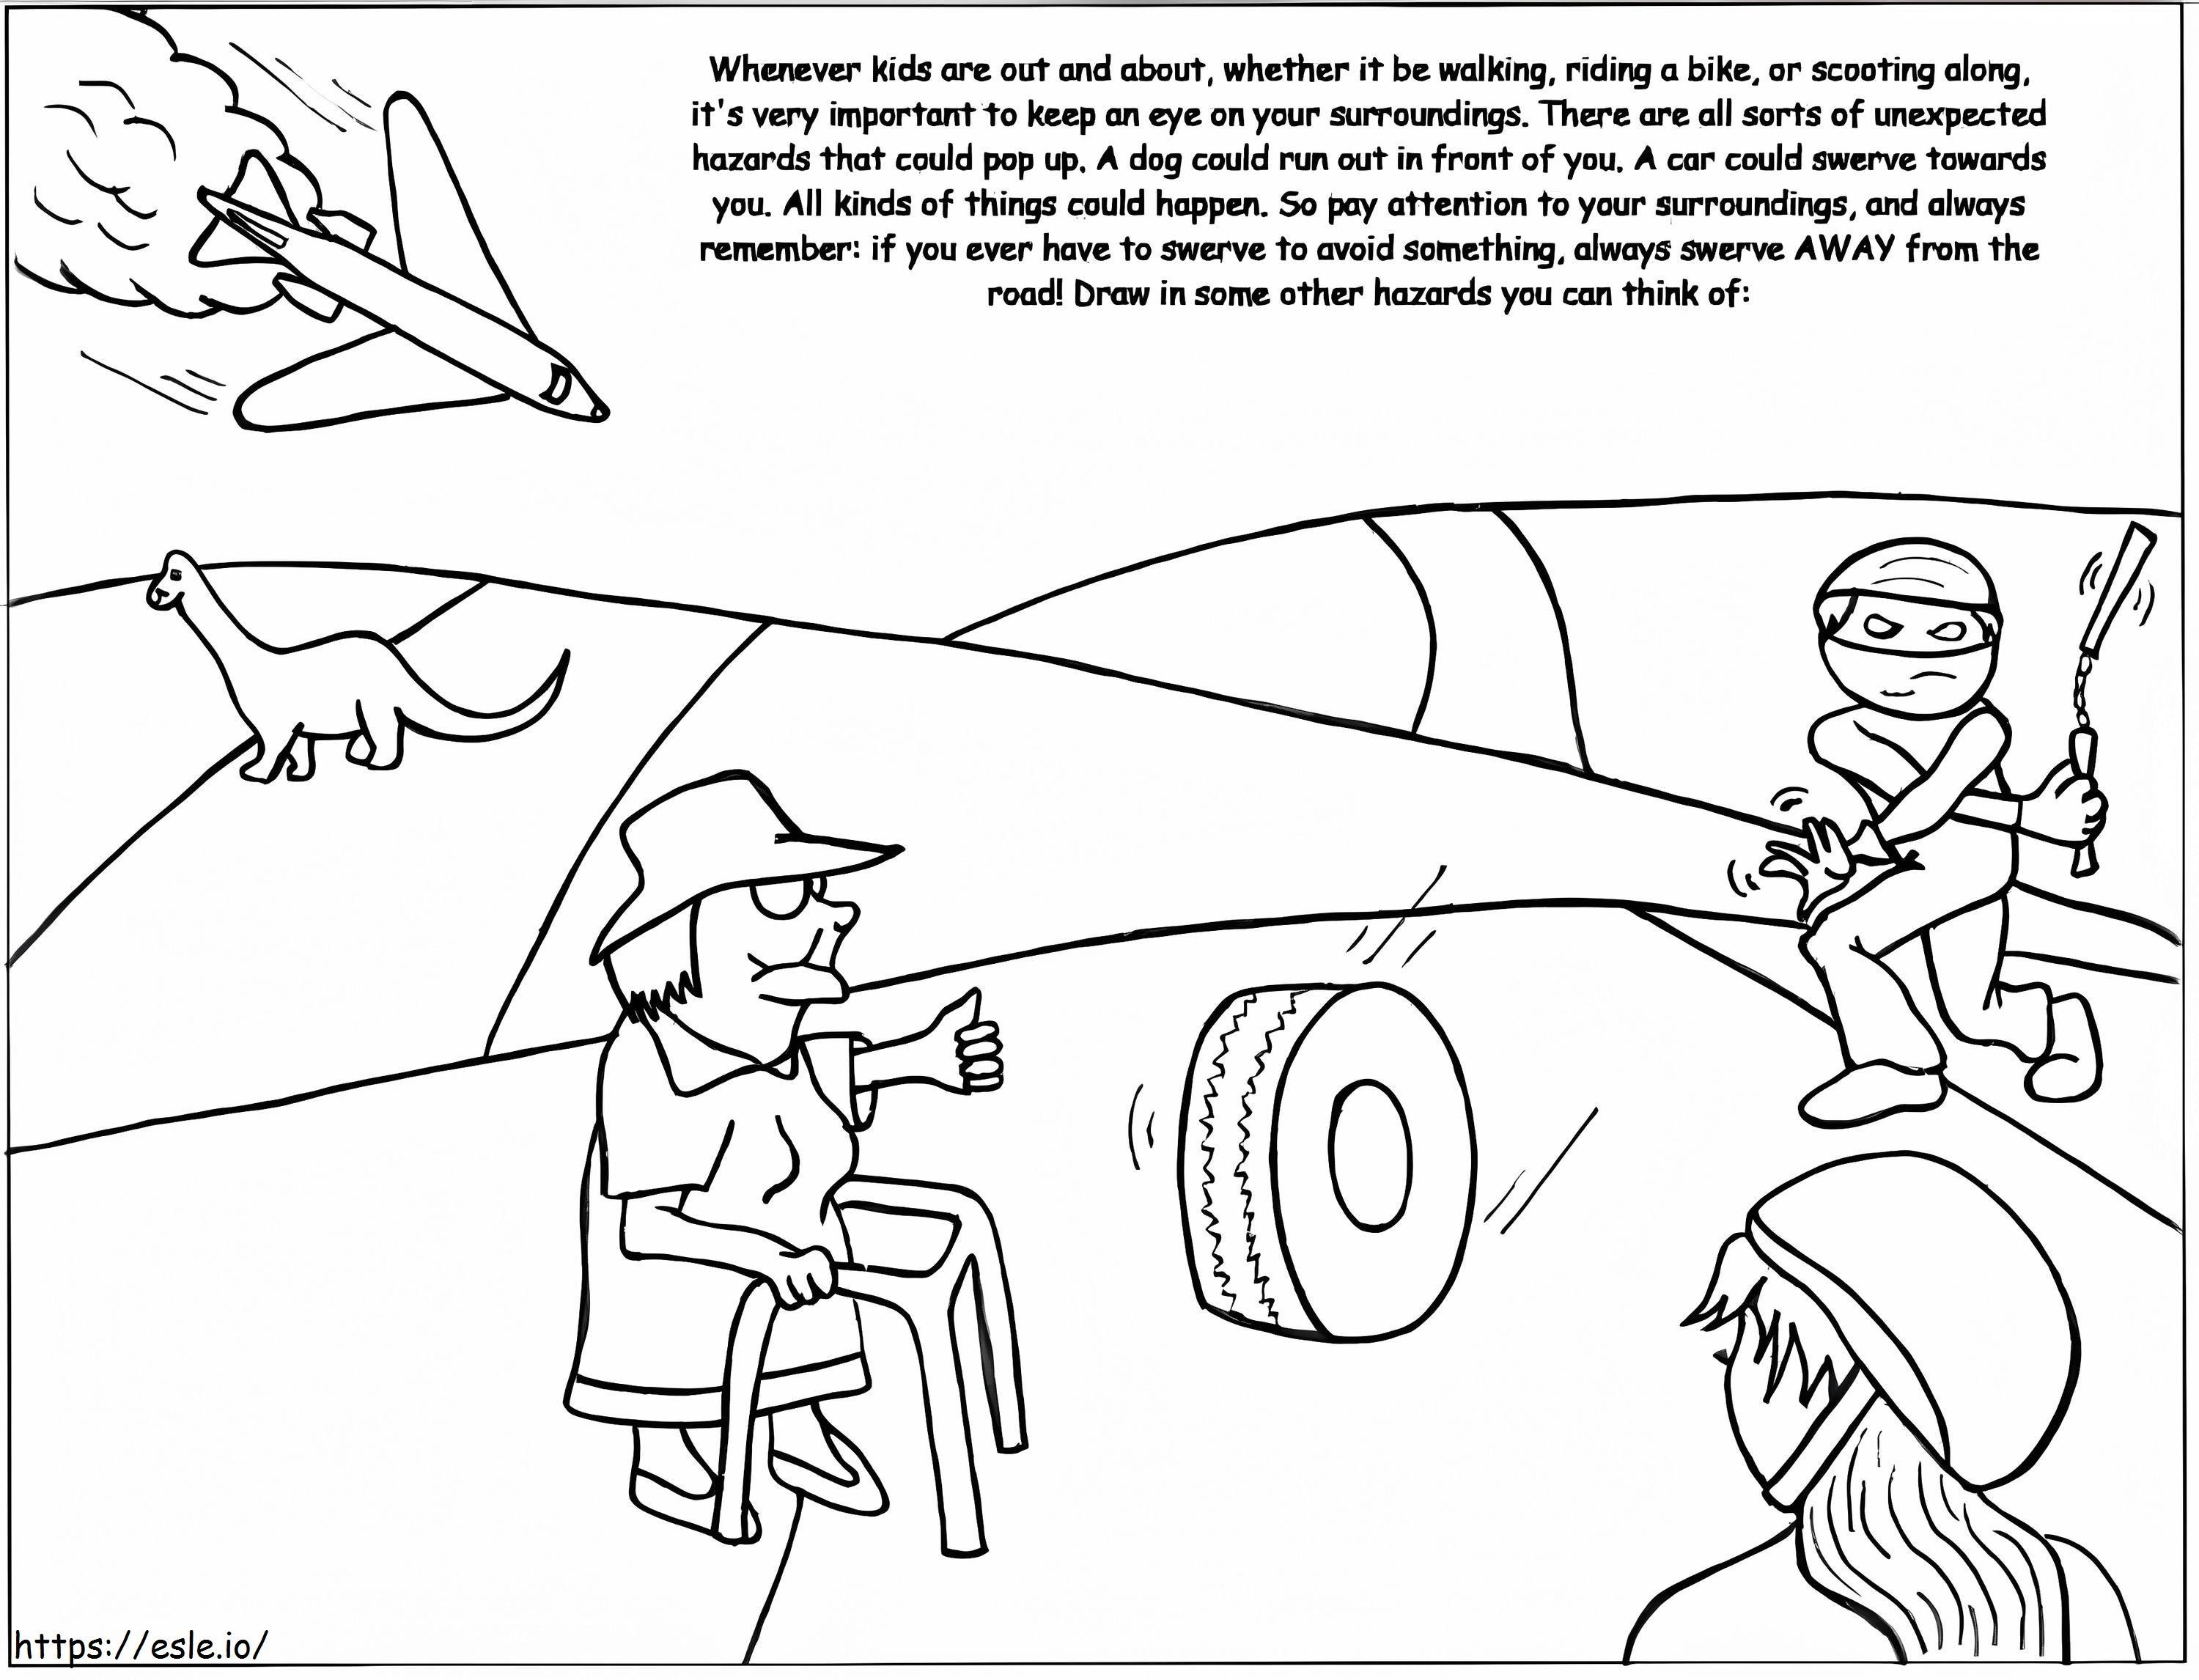 Street Hazards coloring page